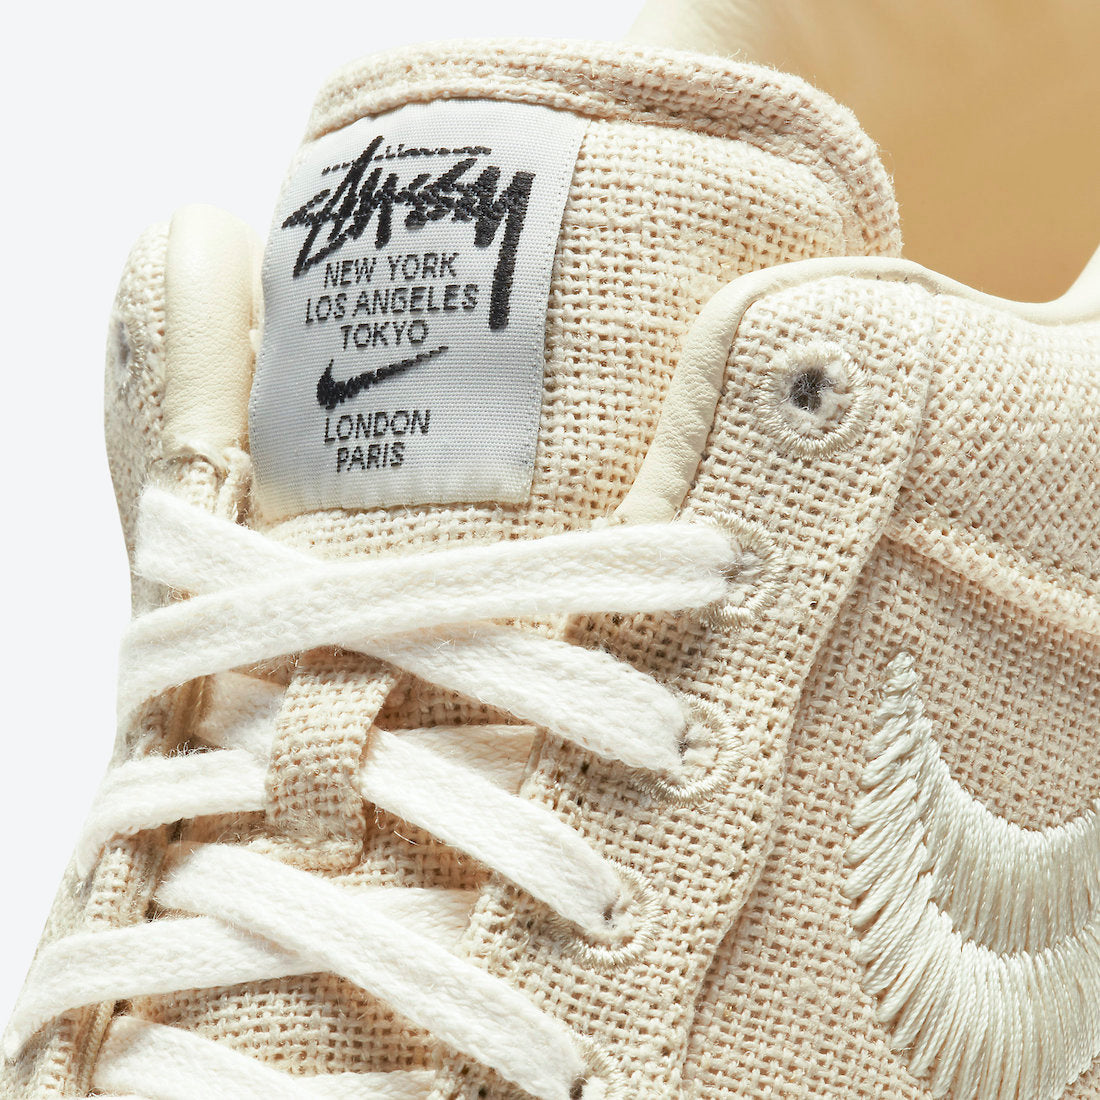 Air Force 1 Low
"Stussy Fossil"